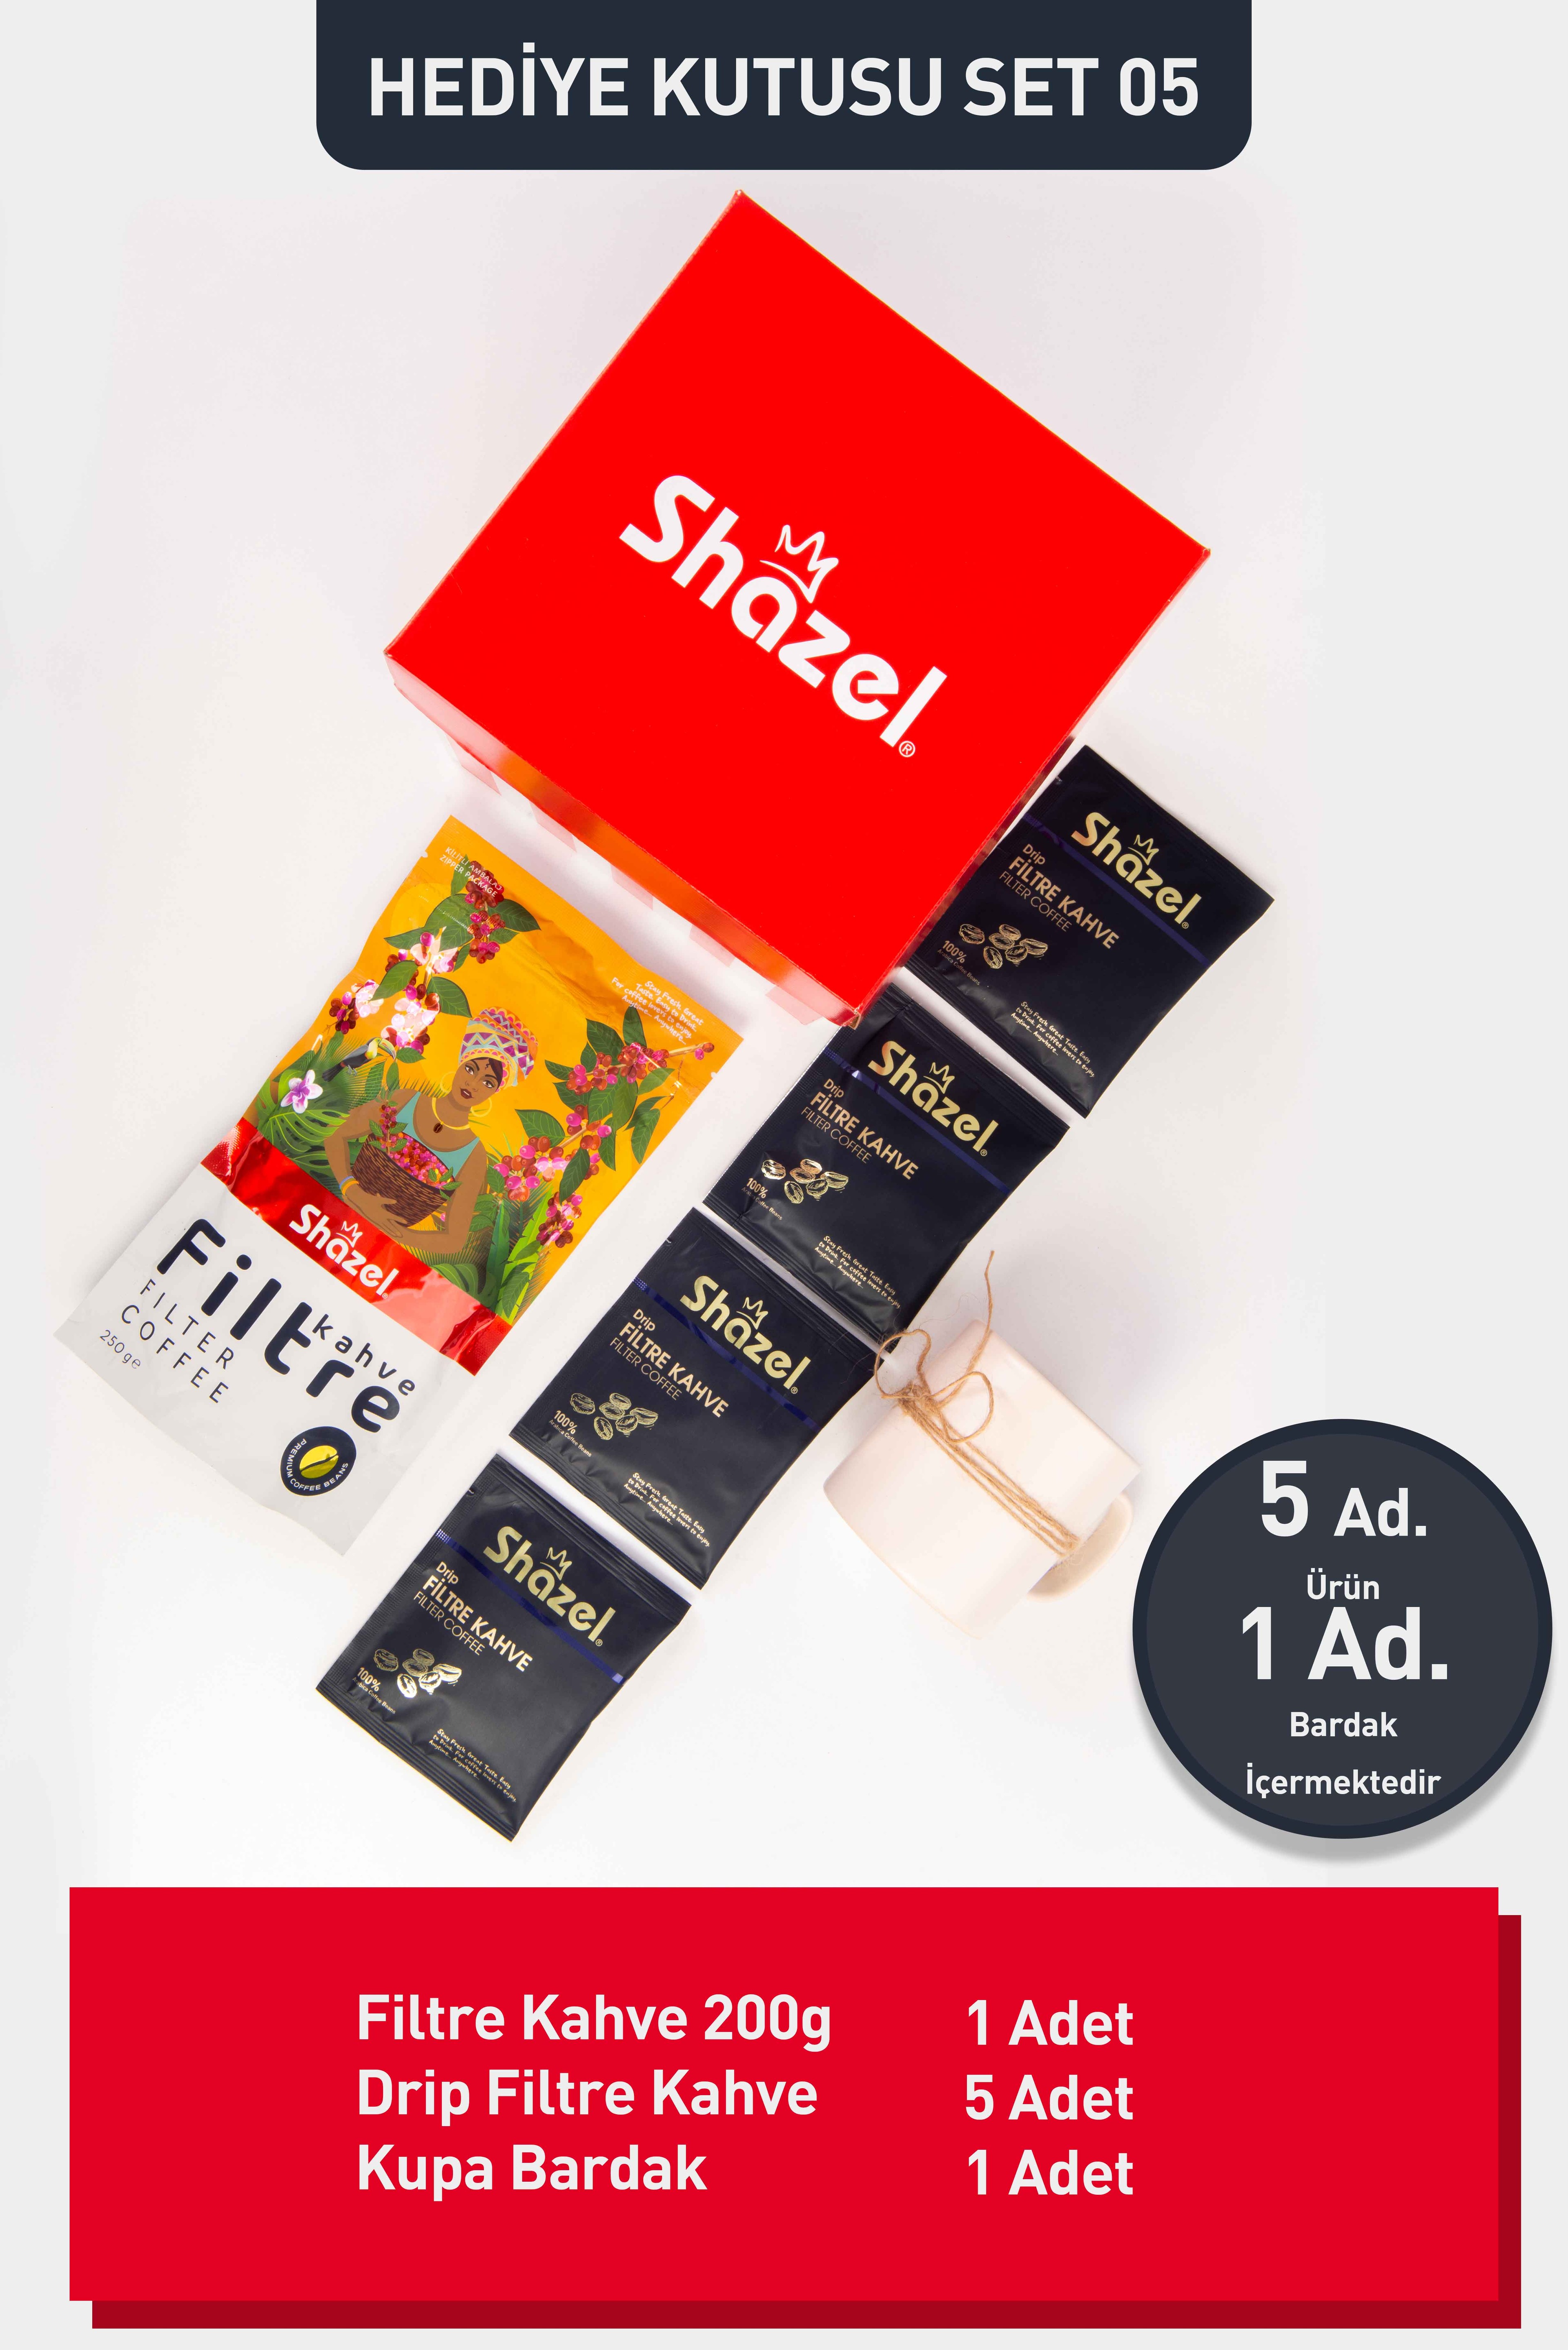 SHAZEL Filter Coffee Gift Set (With Special Blend Filter Coffee and Mug Gift)